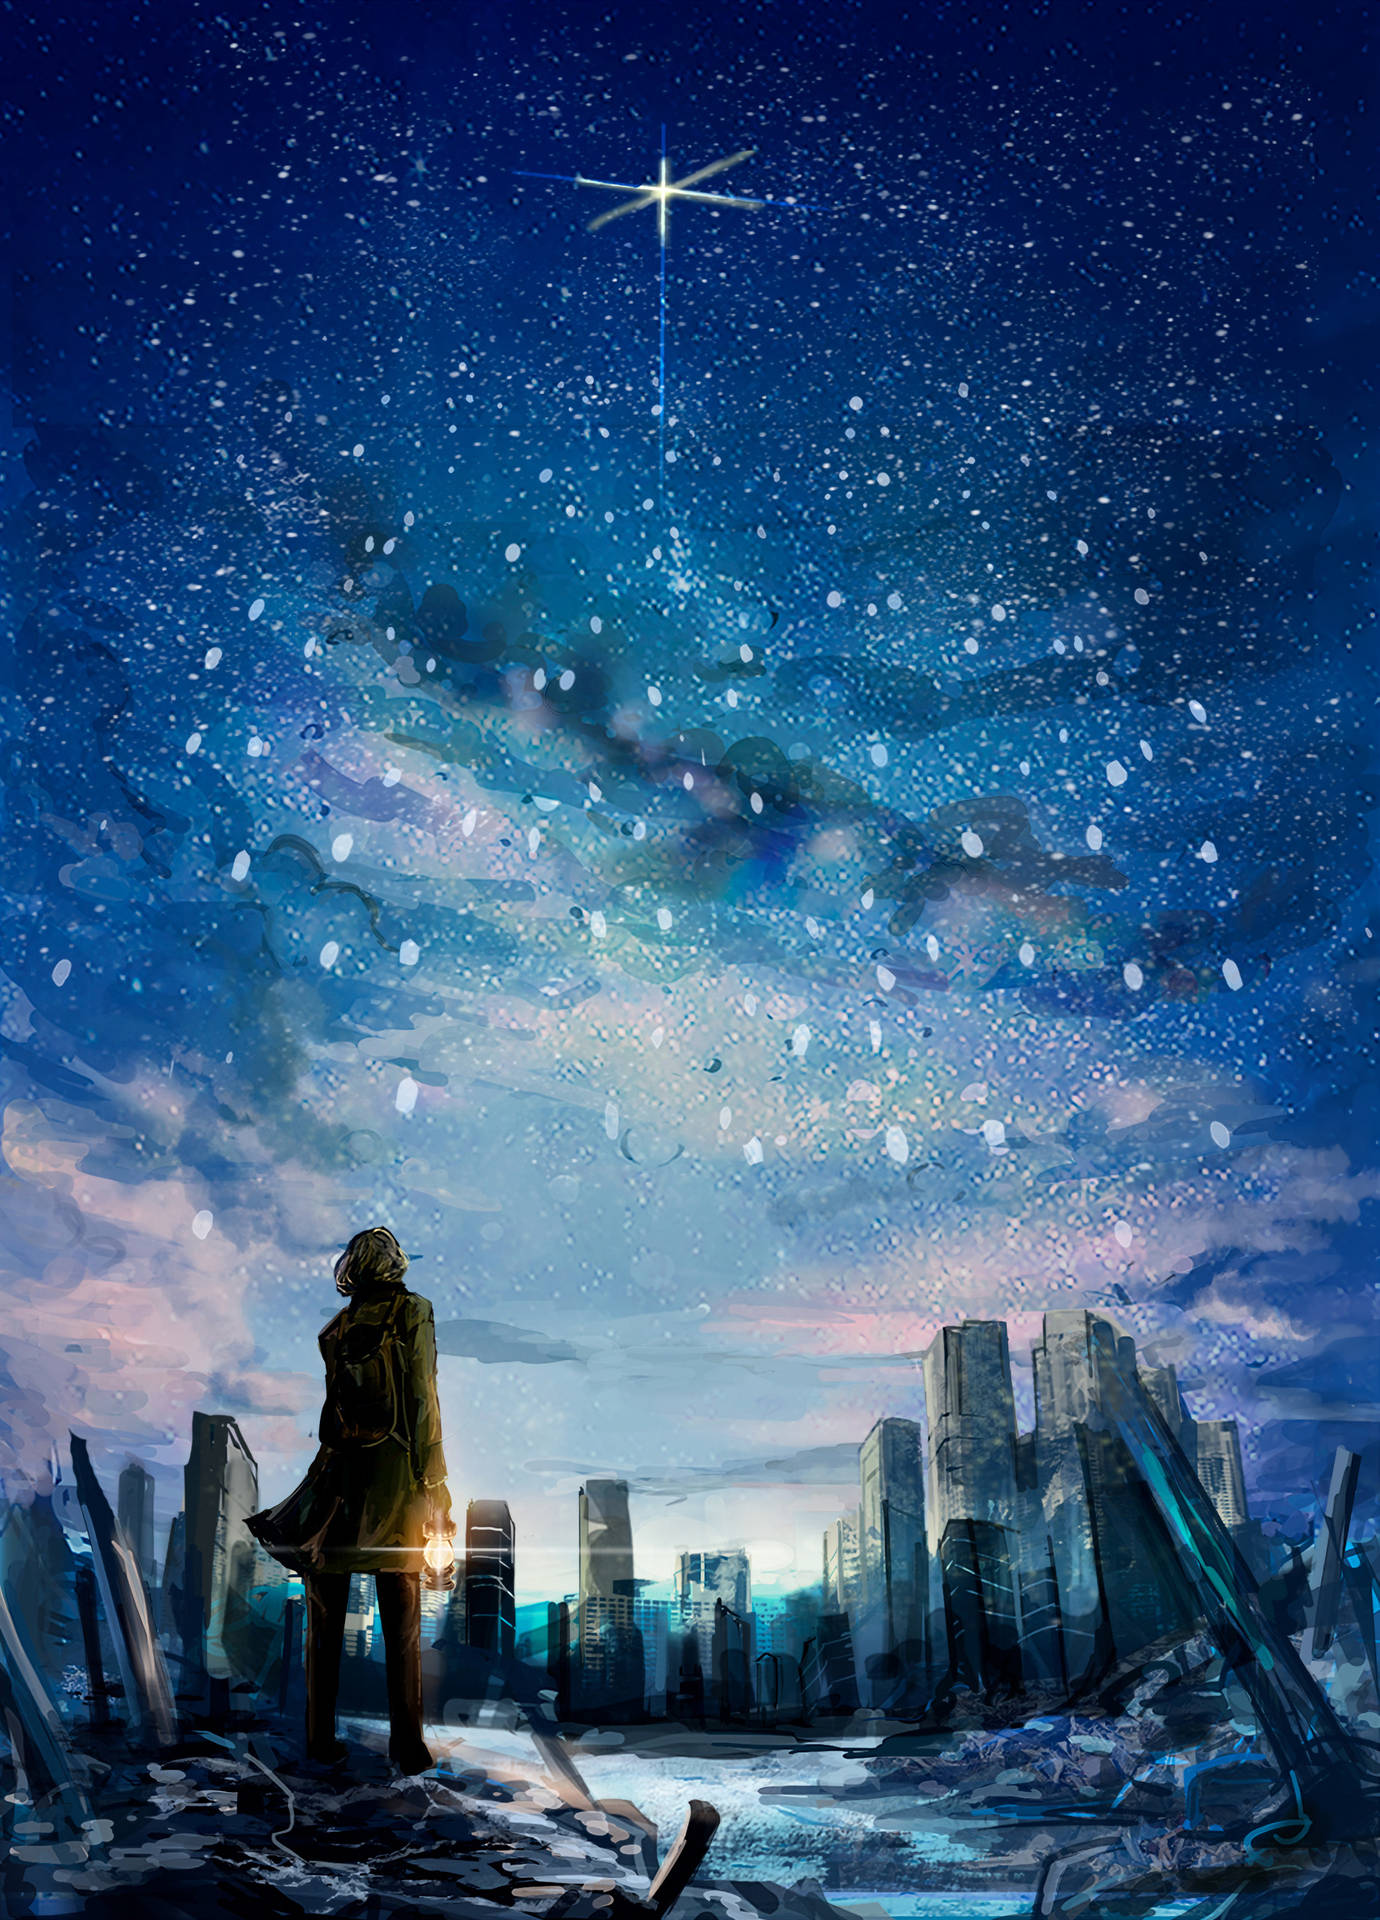 Starry City Art At Night Background